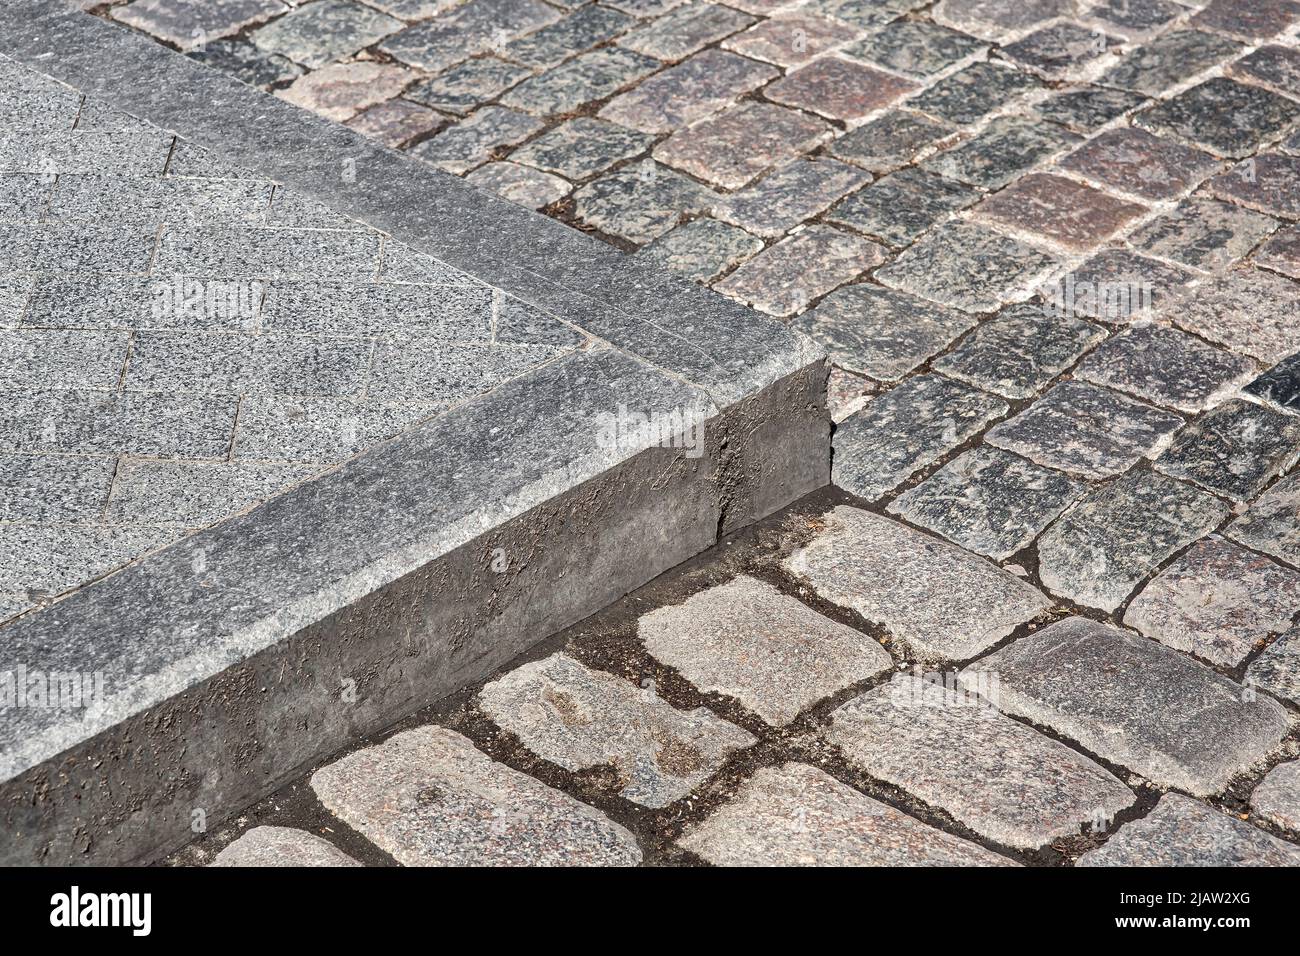 corner of a pedestrian sidewalk made of granite curb and stone rectangular brick tiles nearby a road paved with rough cut paving slabs close-up, nobod Stock Photo